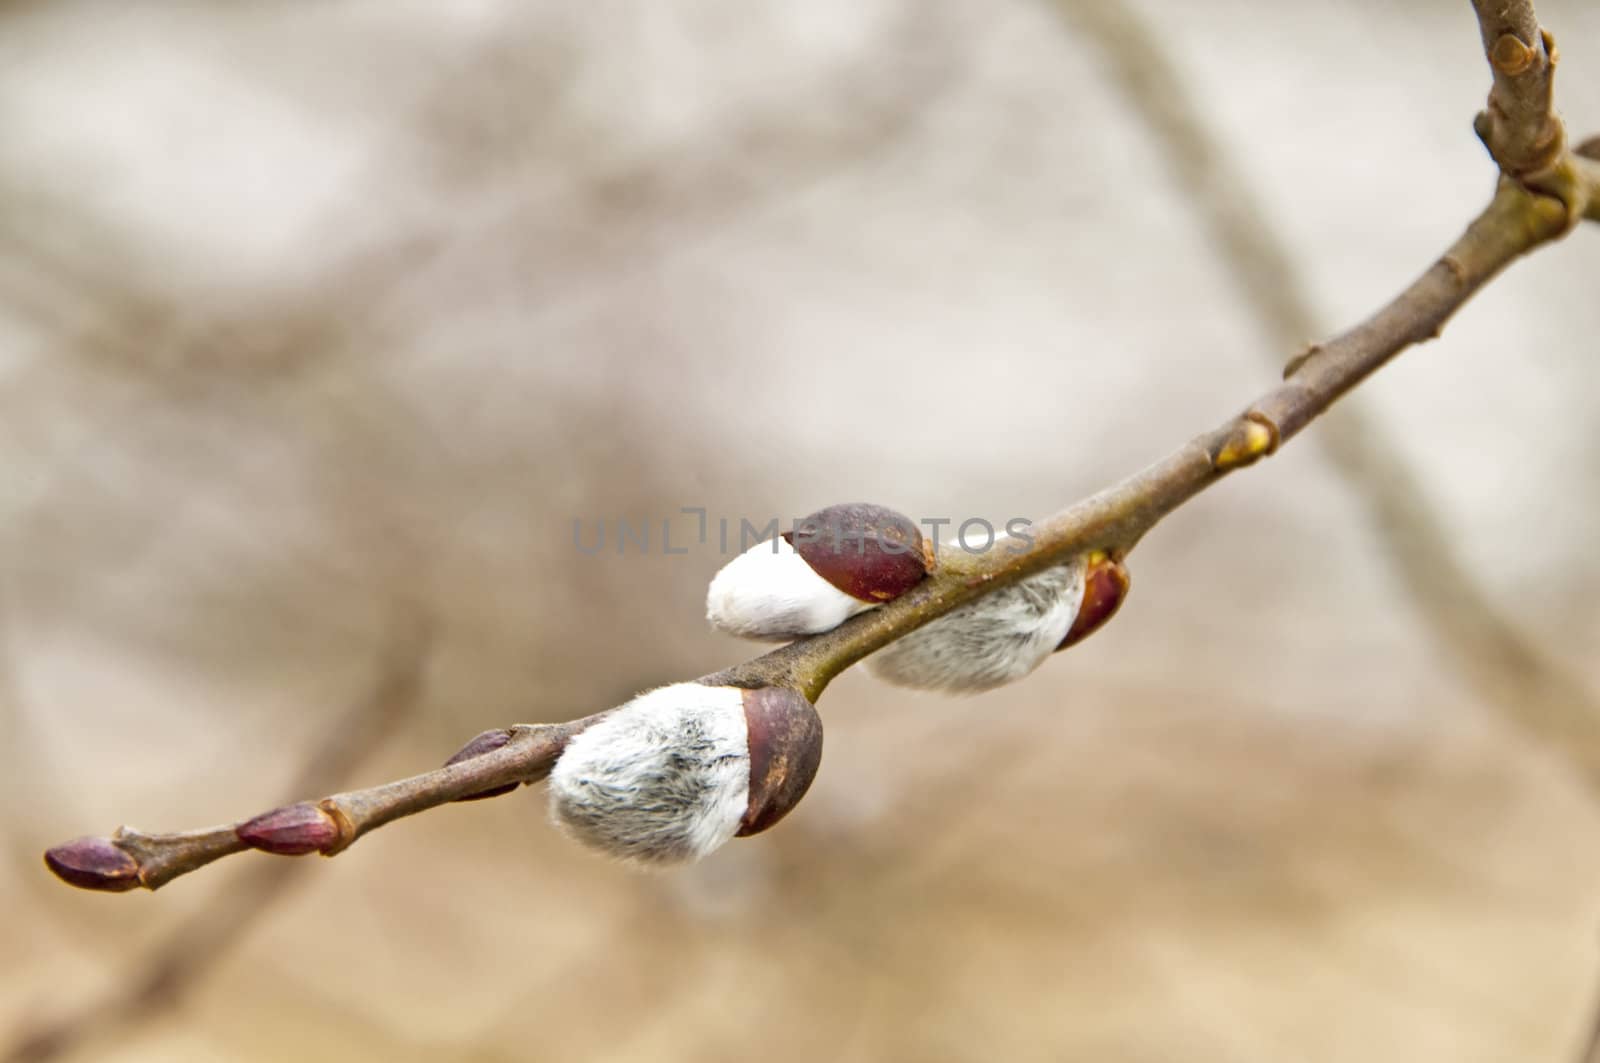 willow blossom